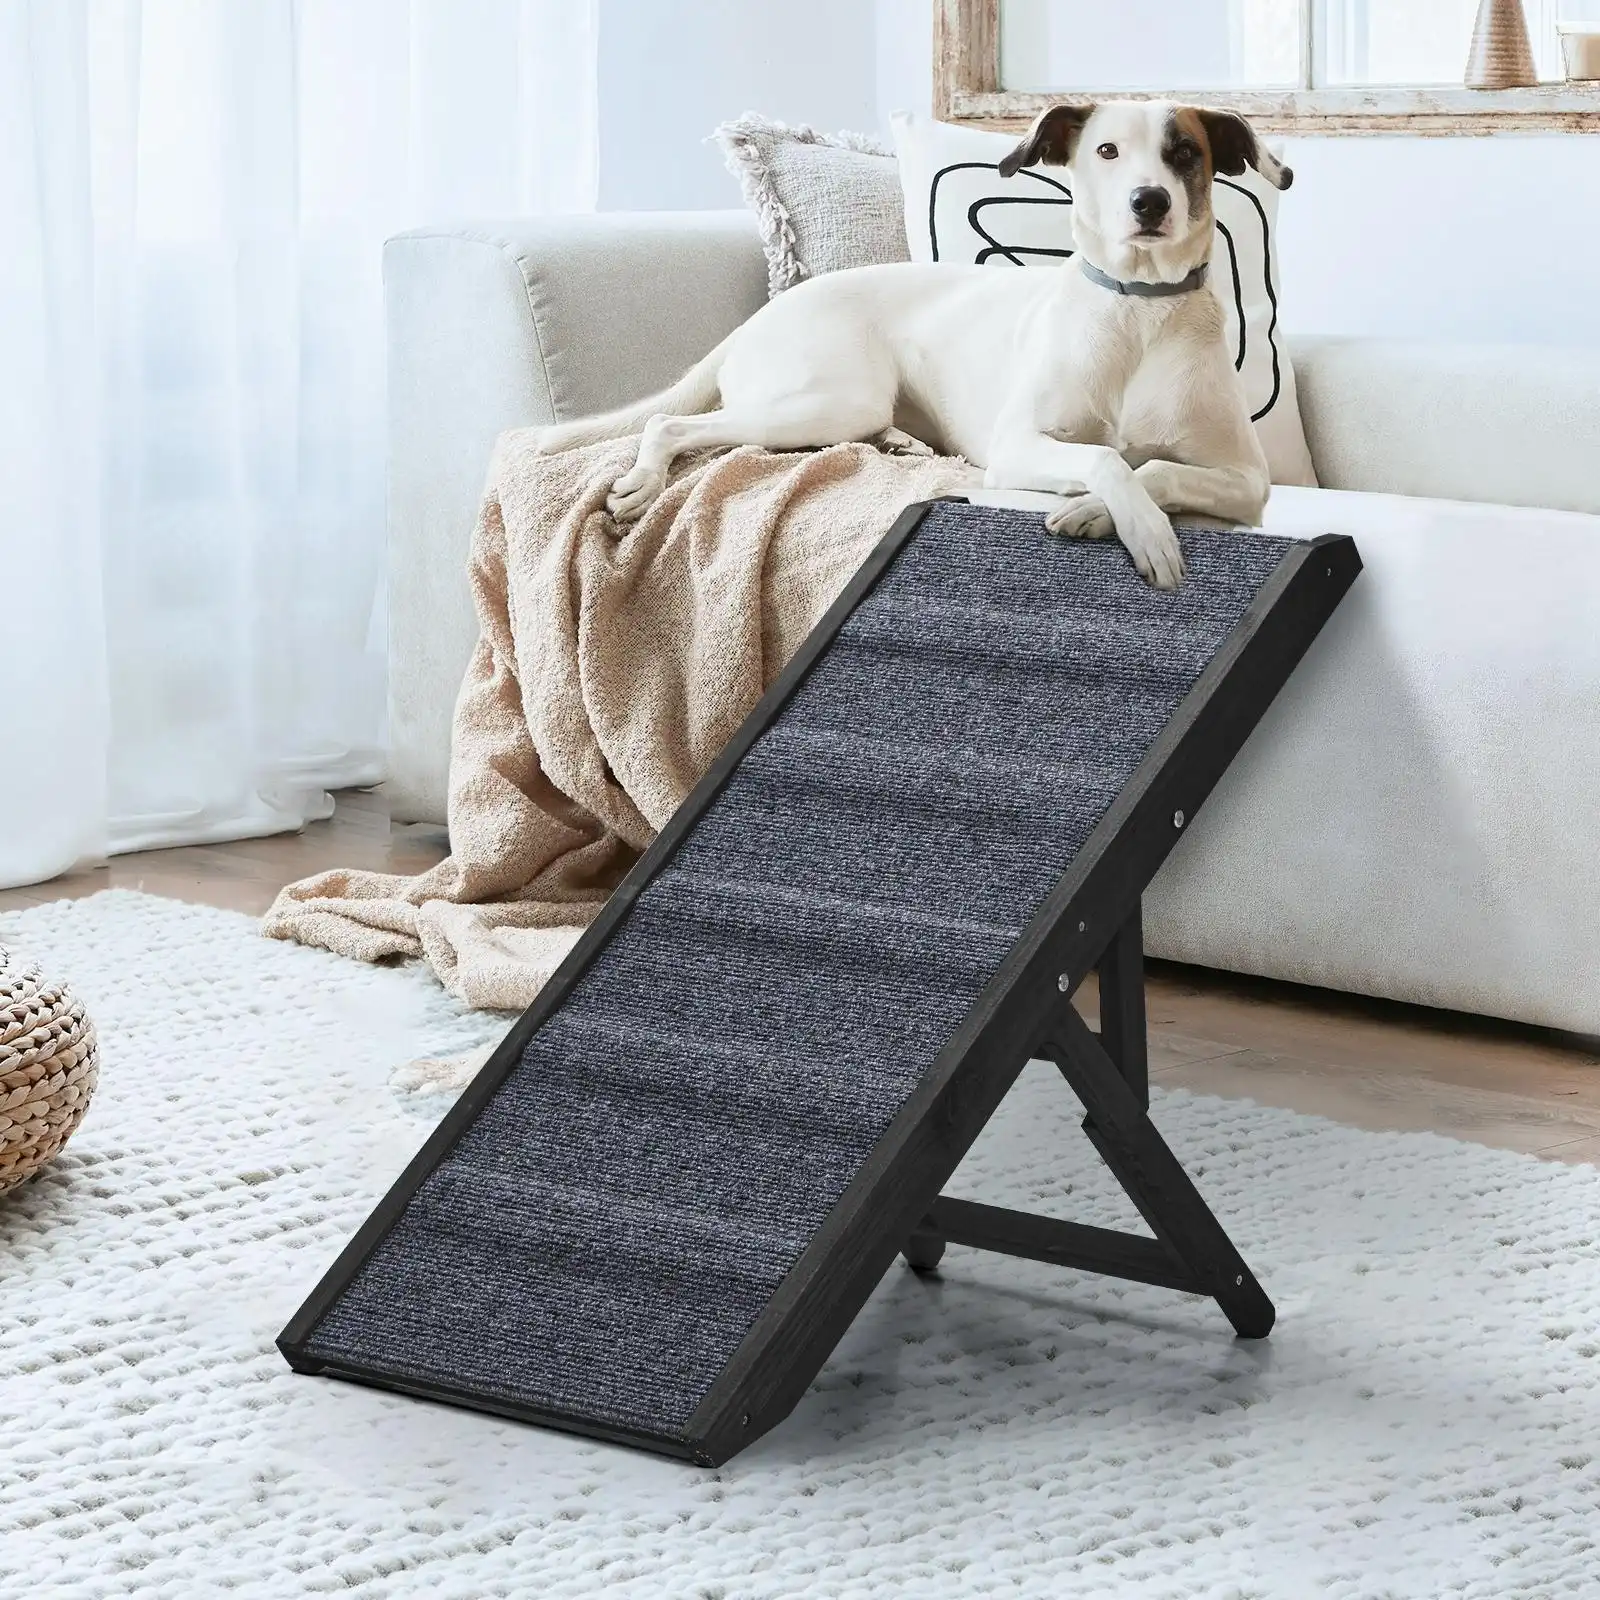 Alopet Dog Pet Ramp Adjustable Height Dogs Stairs Bed Sofa Car Foldable 90cm